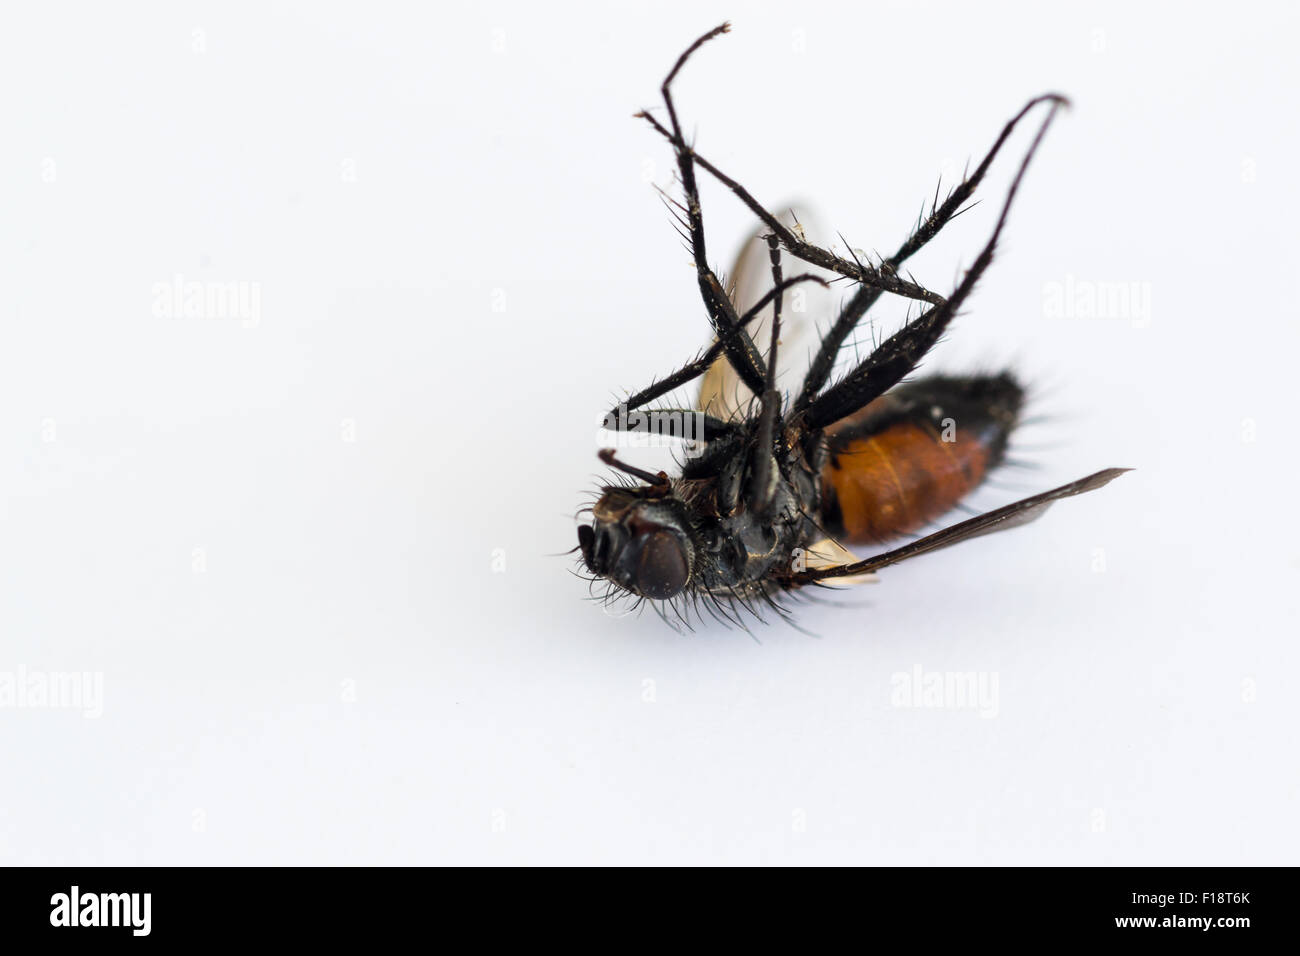 Single dead housefly Musca domestica on a white background Stock Photo